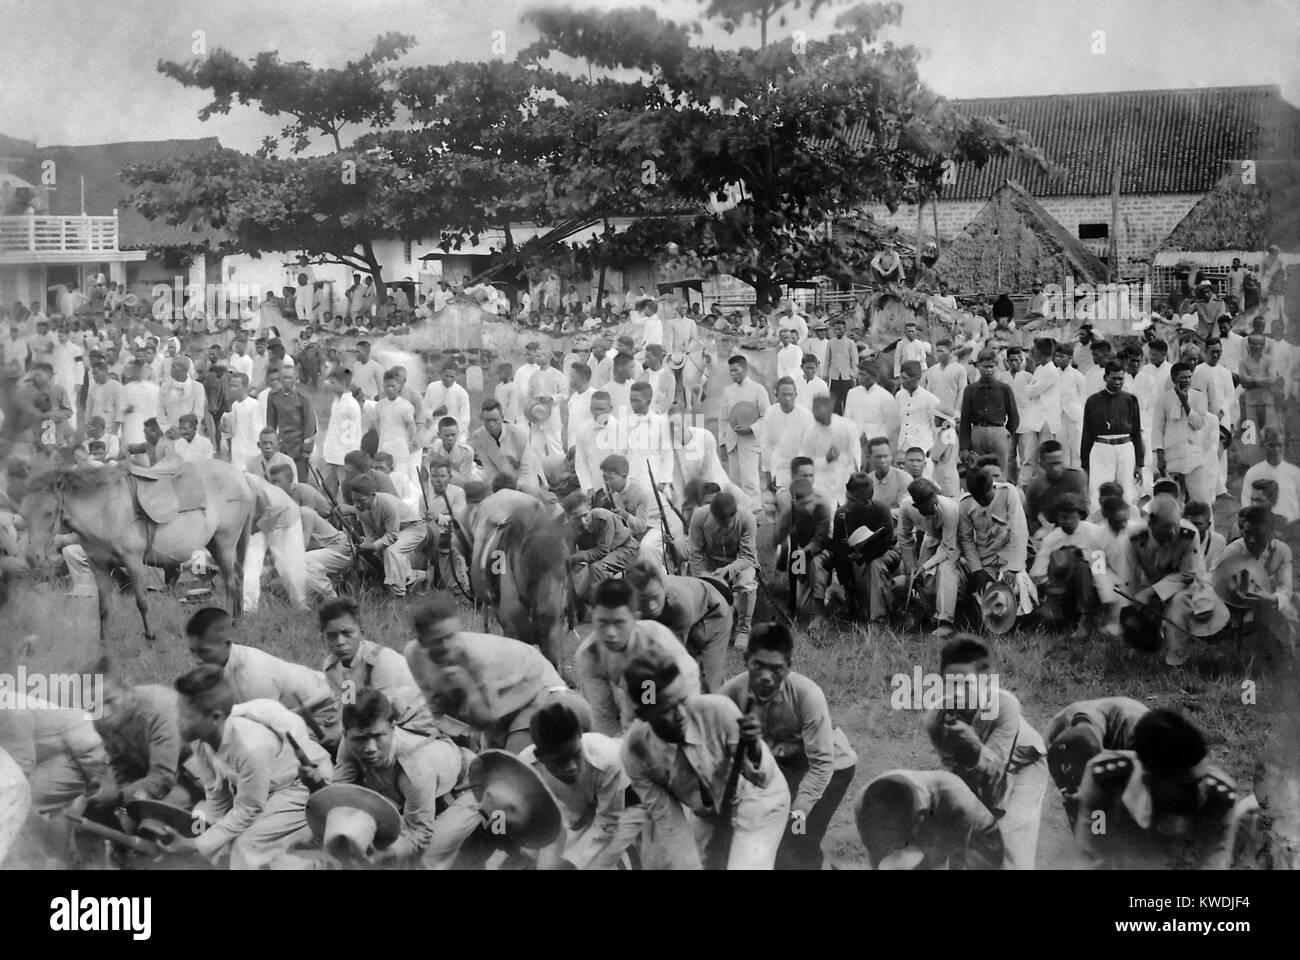 Prayer Before the Surrender as Filipino men surrender their weapons. US army photo from the Dept. of Mindanao and Jole, the Islamic Islands in the Southern Philippines. In Sept. 1911, Gen. John Pershing the ordered the disarmament of the Southern Philippines by December 1, 1911 (BSLOC 2017 10 99) Stock Photo